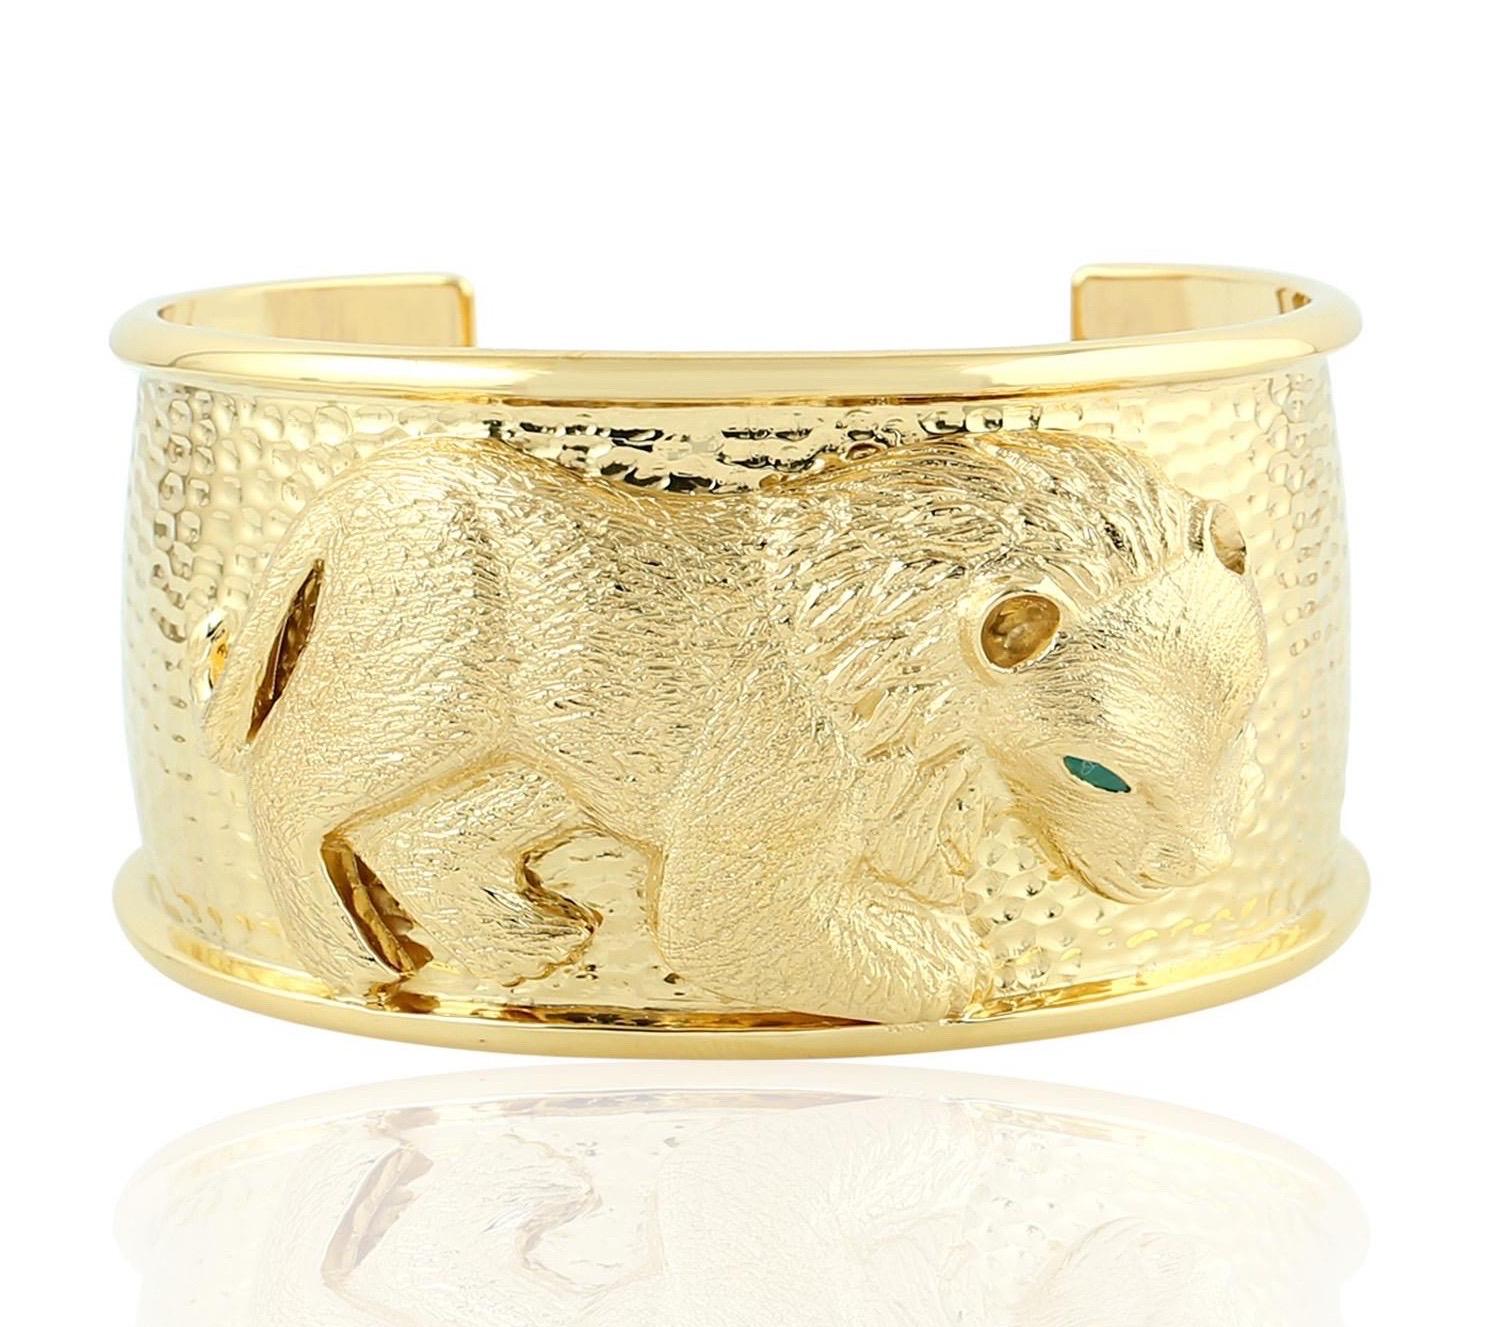 Cast in yellow gold finish and sterling silver.  This beautiful lion motif cuff is hand set with textured pattern & .18 carats emerald. 

FOLLOW  MEGHNA JEWELS storefront to view the latest collection & exclusive pieces.  Meghna Jewels is proudly